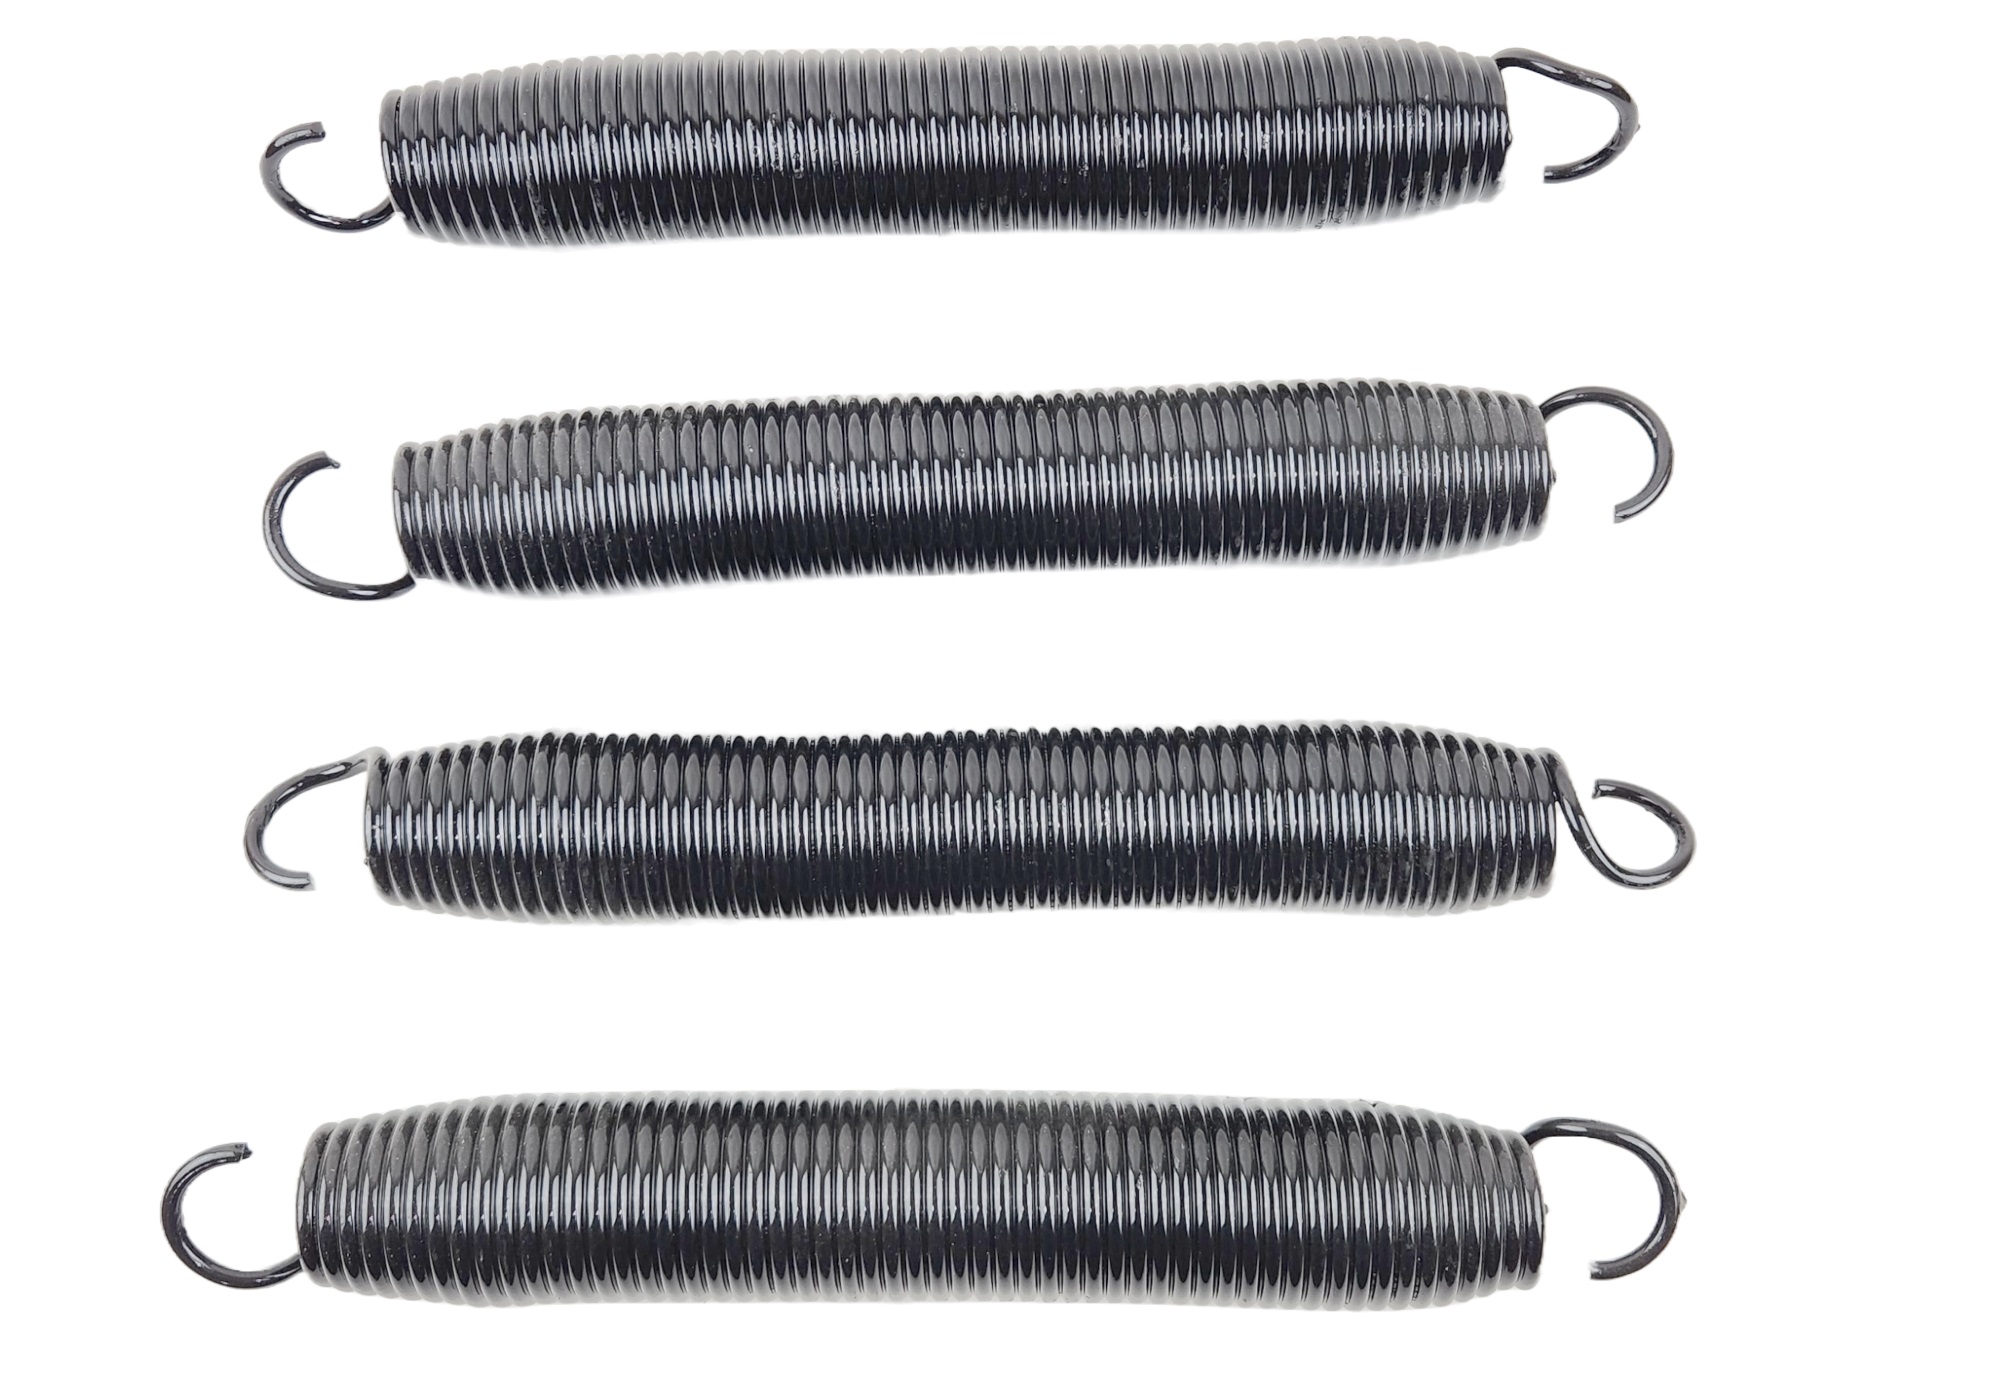 HWH R1171 Replacement Spring Kit for Hydraulic Leveling Jacks - Pair (4 Springs)